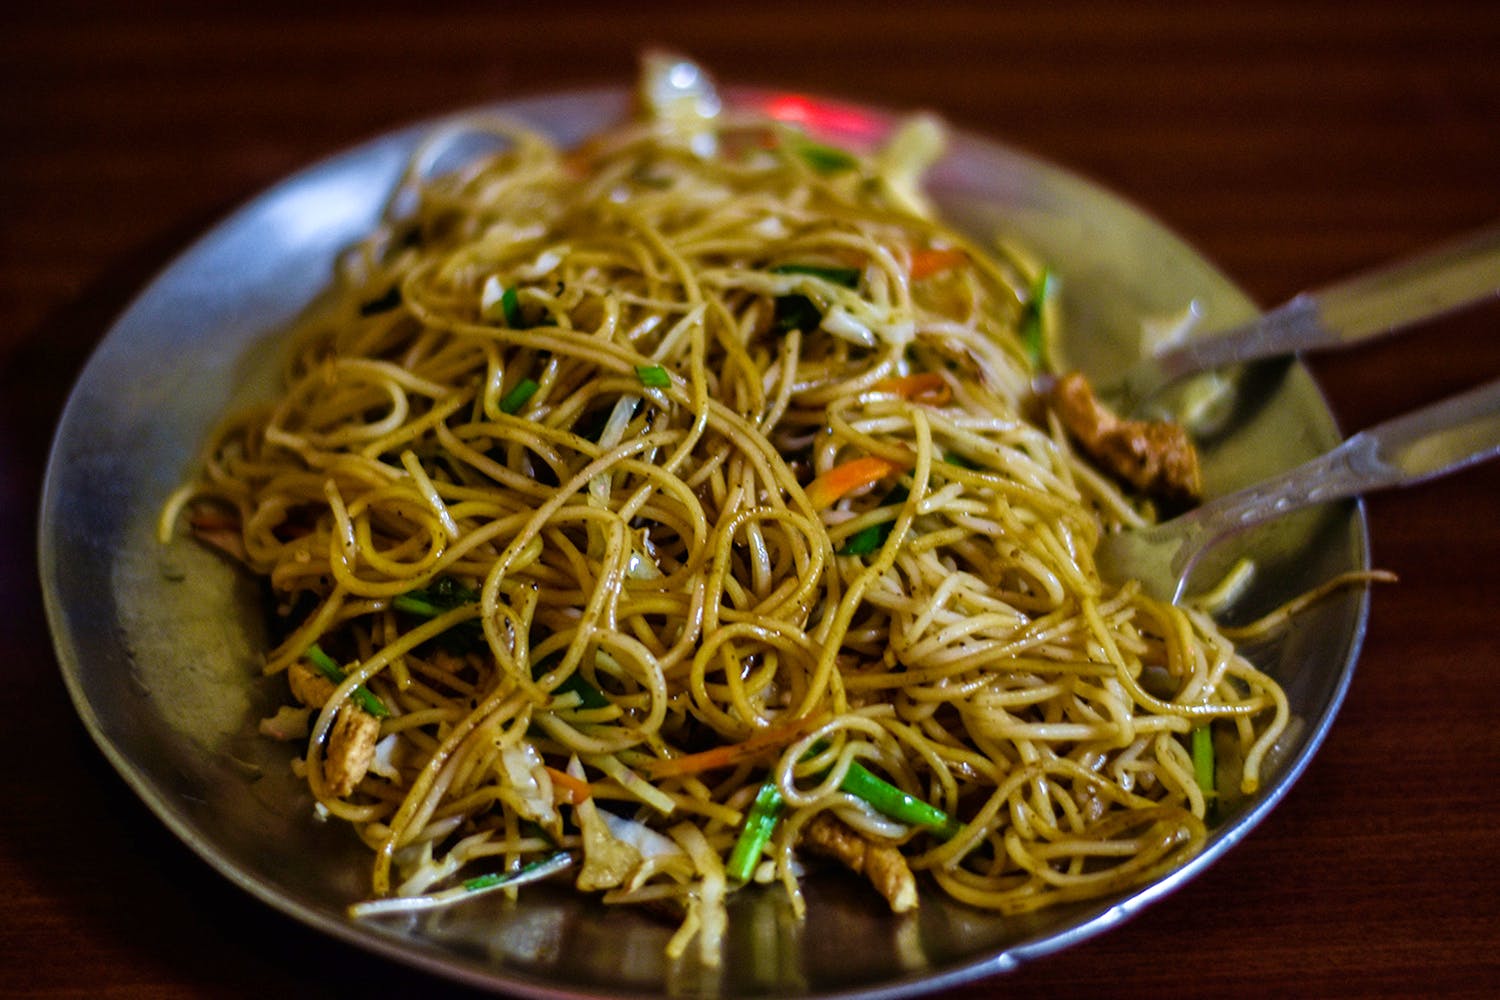 Dish,Cuisine,Noodle,Food,Chow mein,Chinese noodles,Fried noodles,Spaghetti,Yakisoba,Lo mein